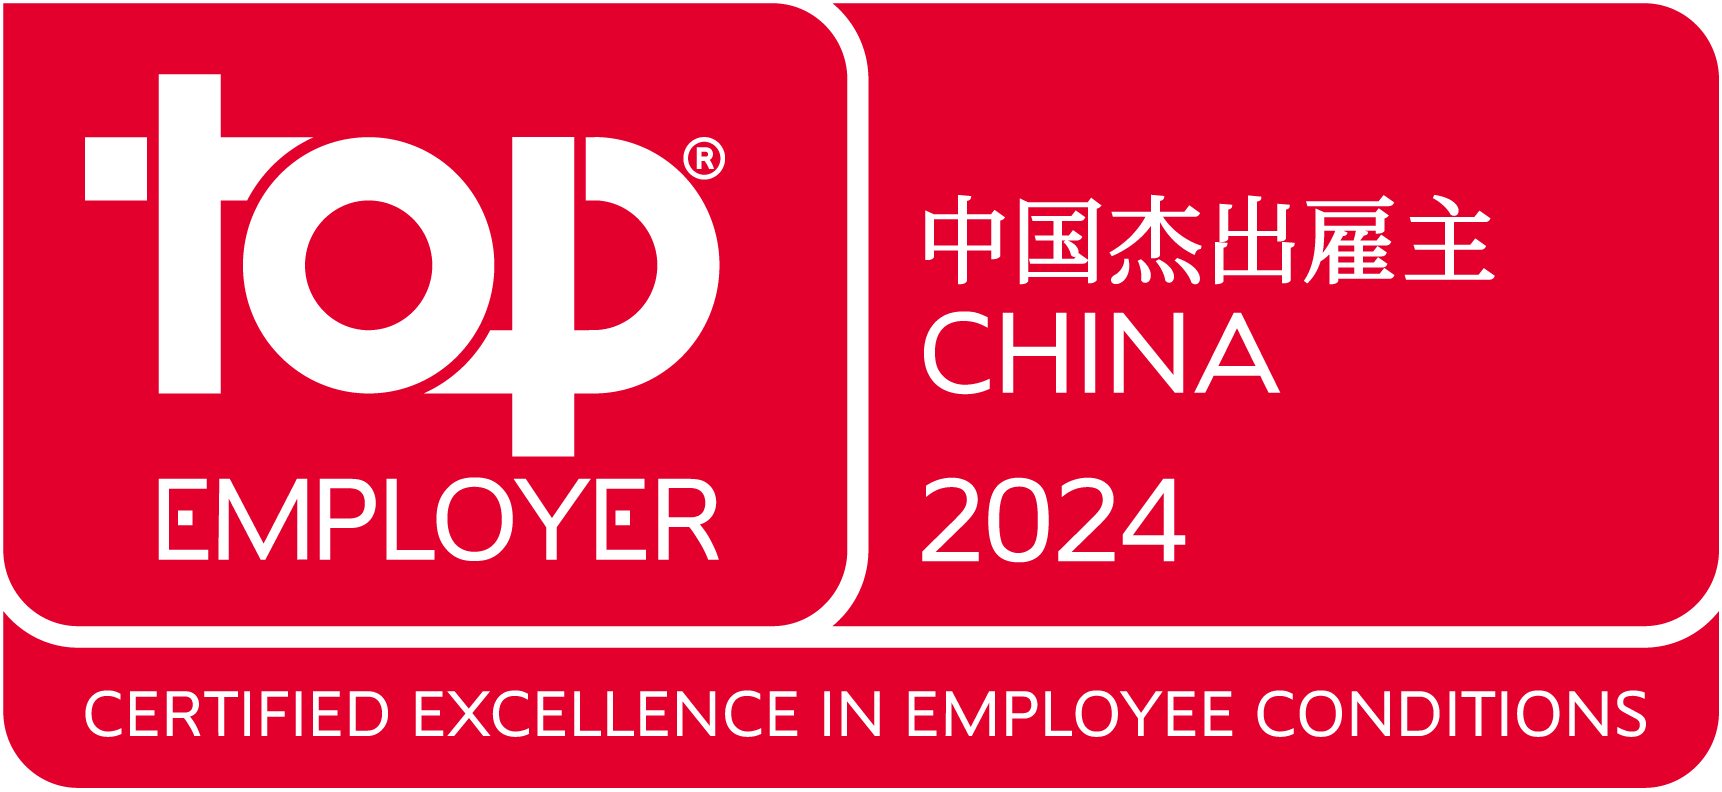 Top_Employer_China_2024.png